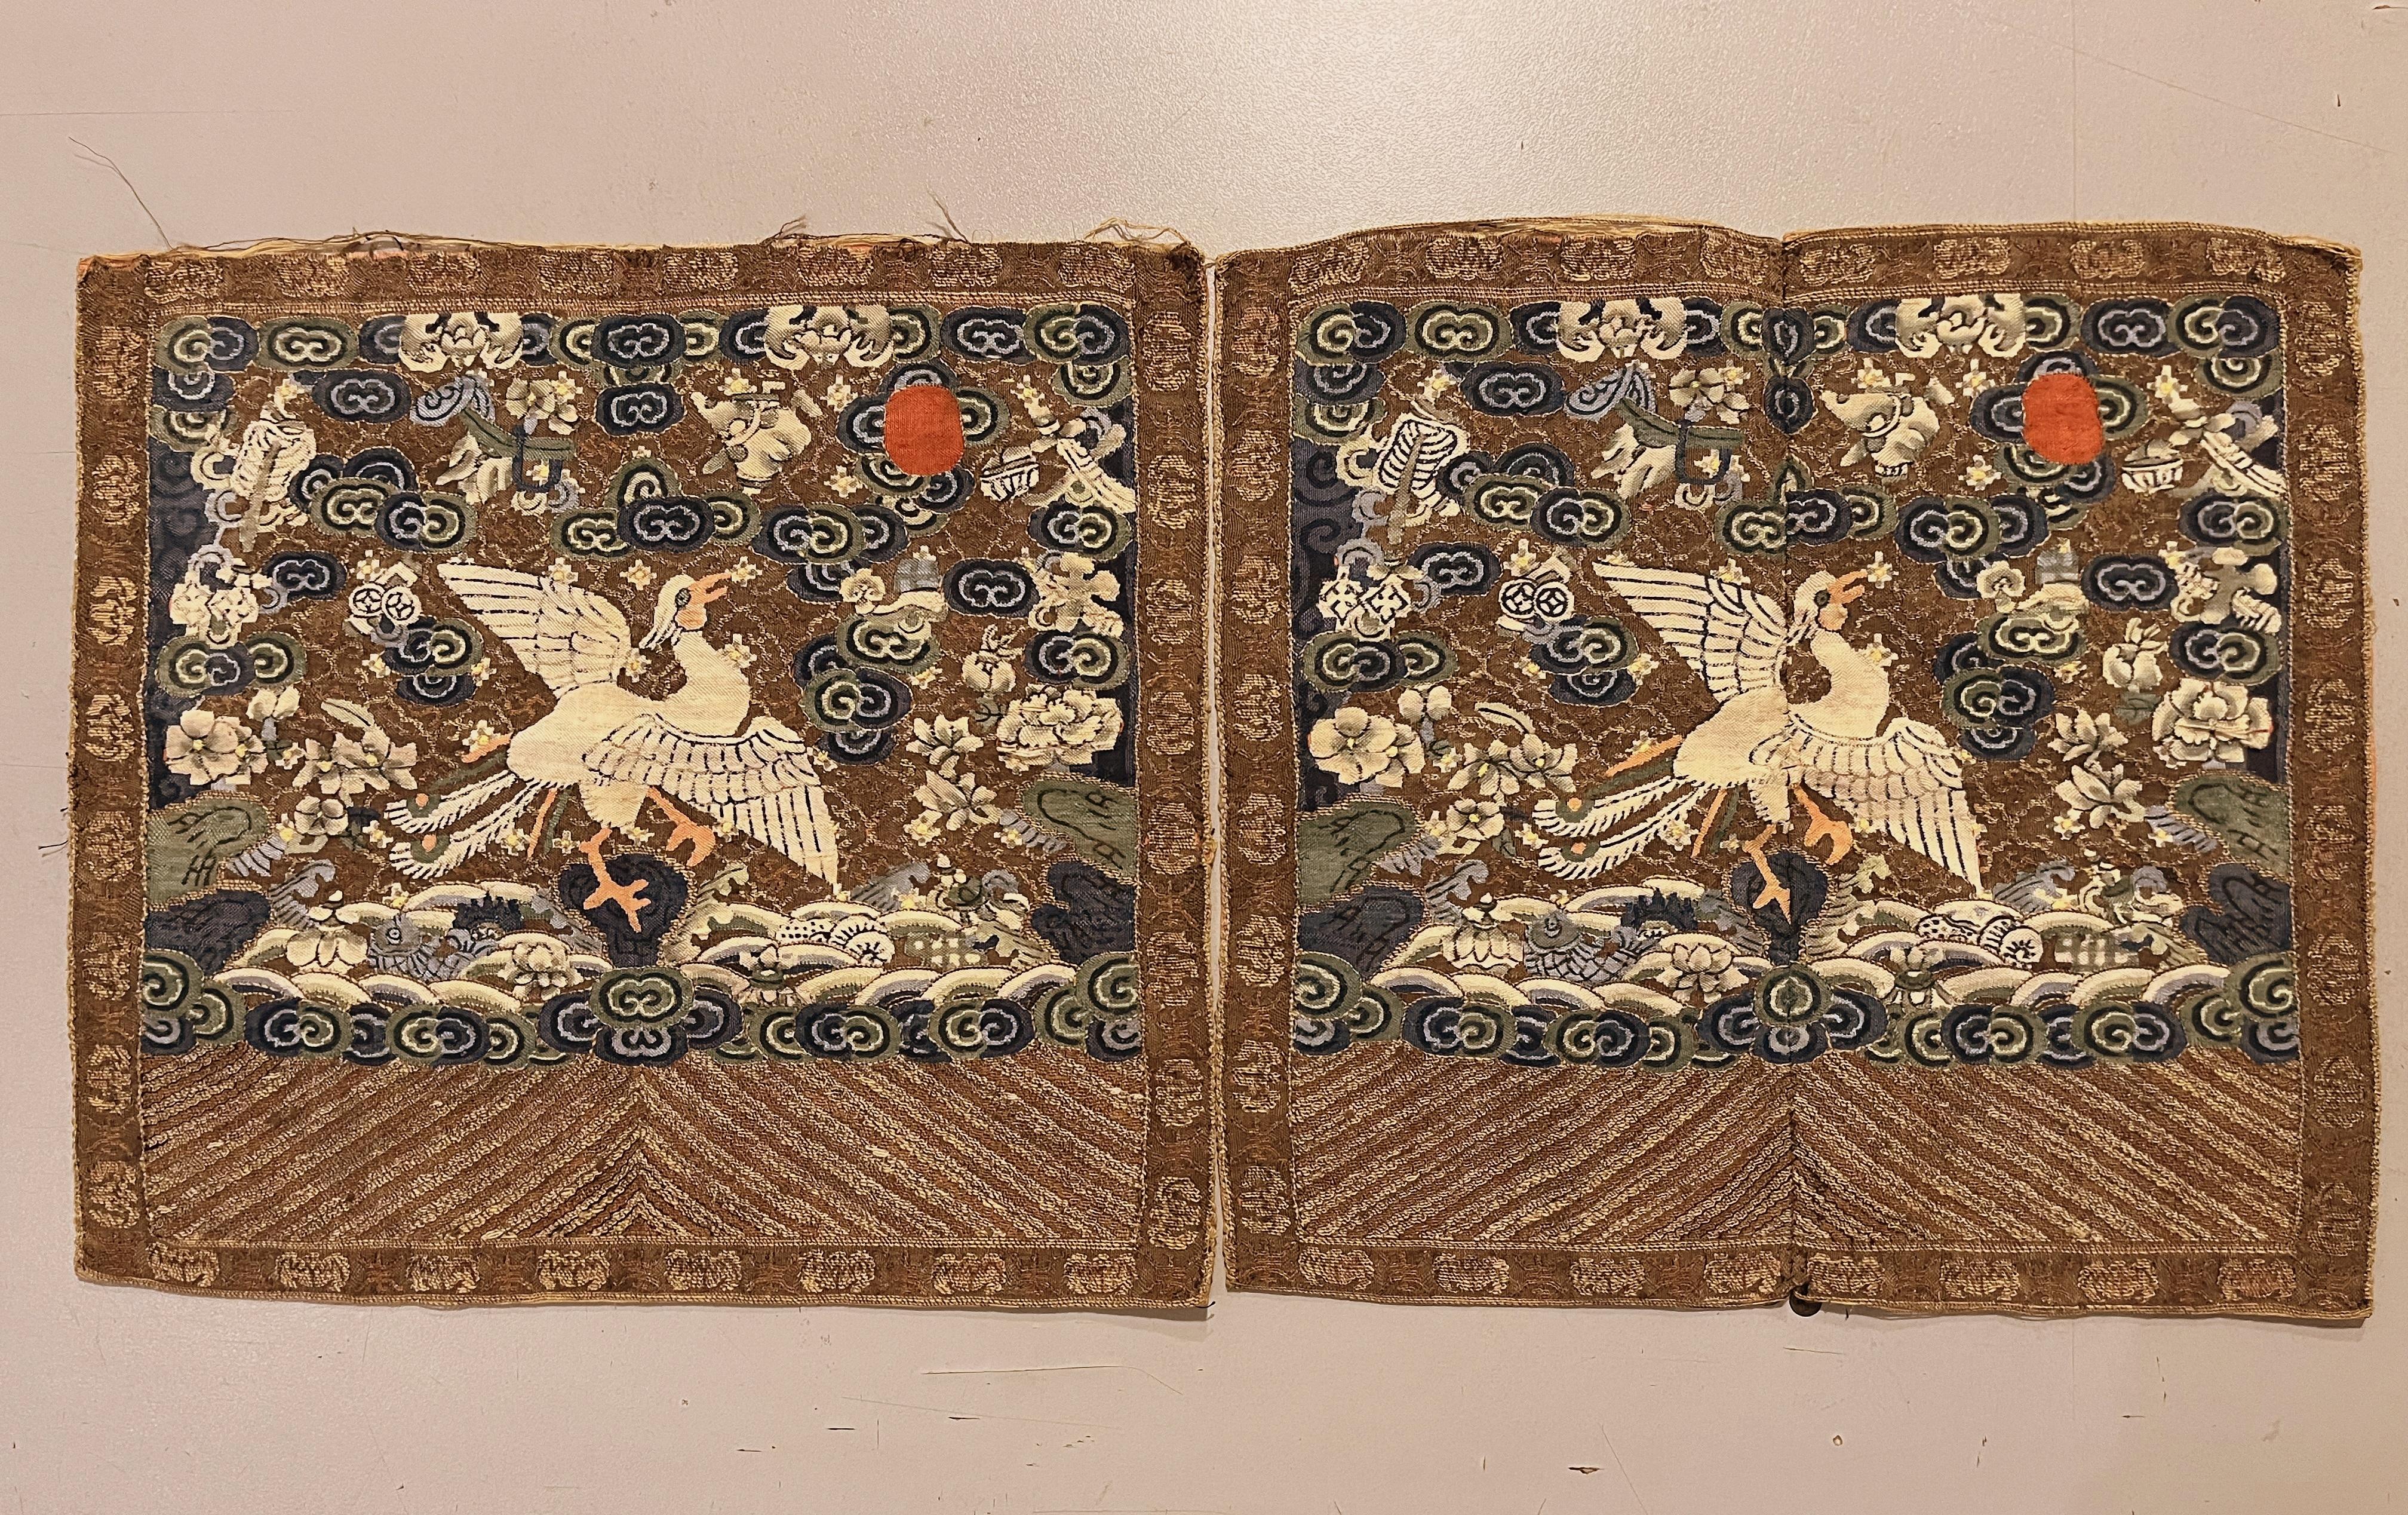 Pair of Qing Dynasty Kesi Imperial civil officer rank badges with pheasant alighting astop a rock emerging from cloud and waves surrounding with auspicious symbols. 
Overall in very good condition.
Each single badge is 11.8